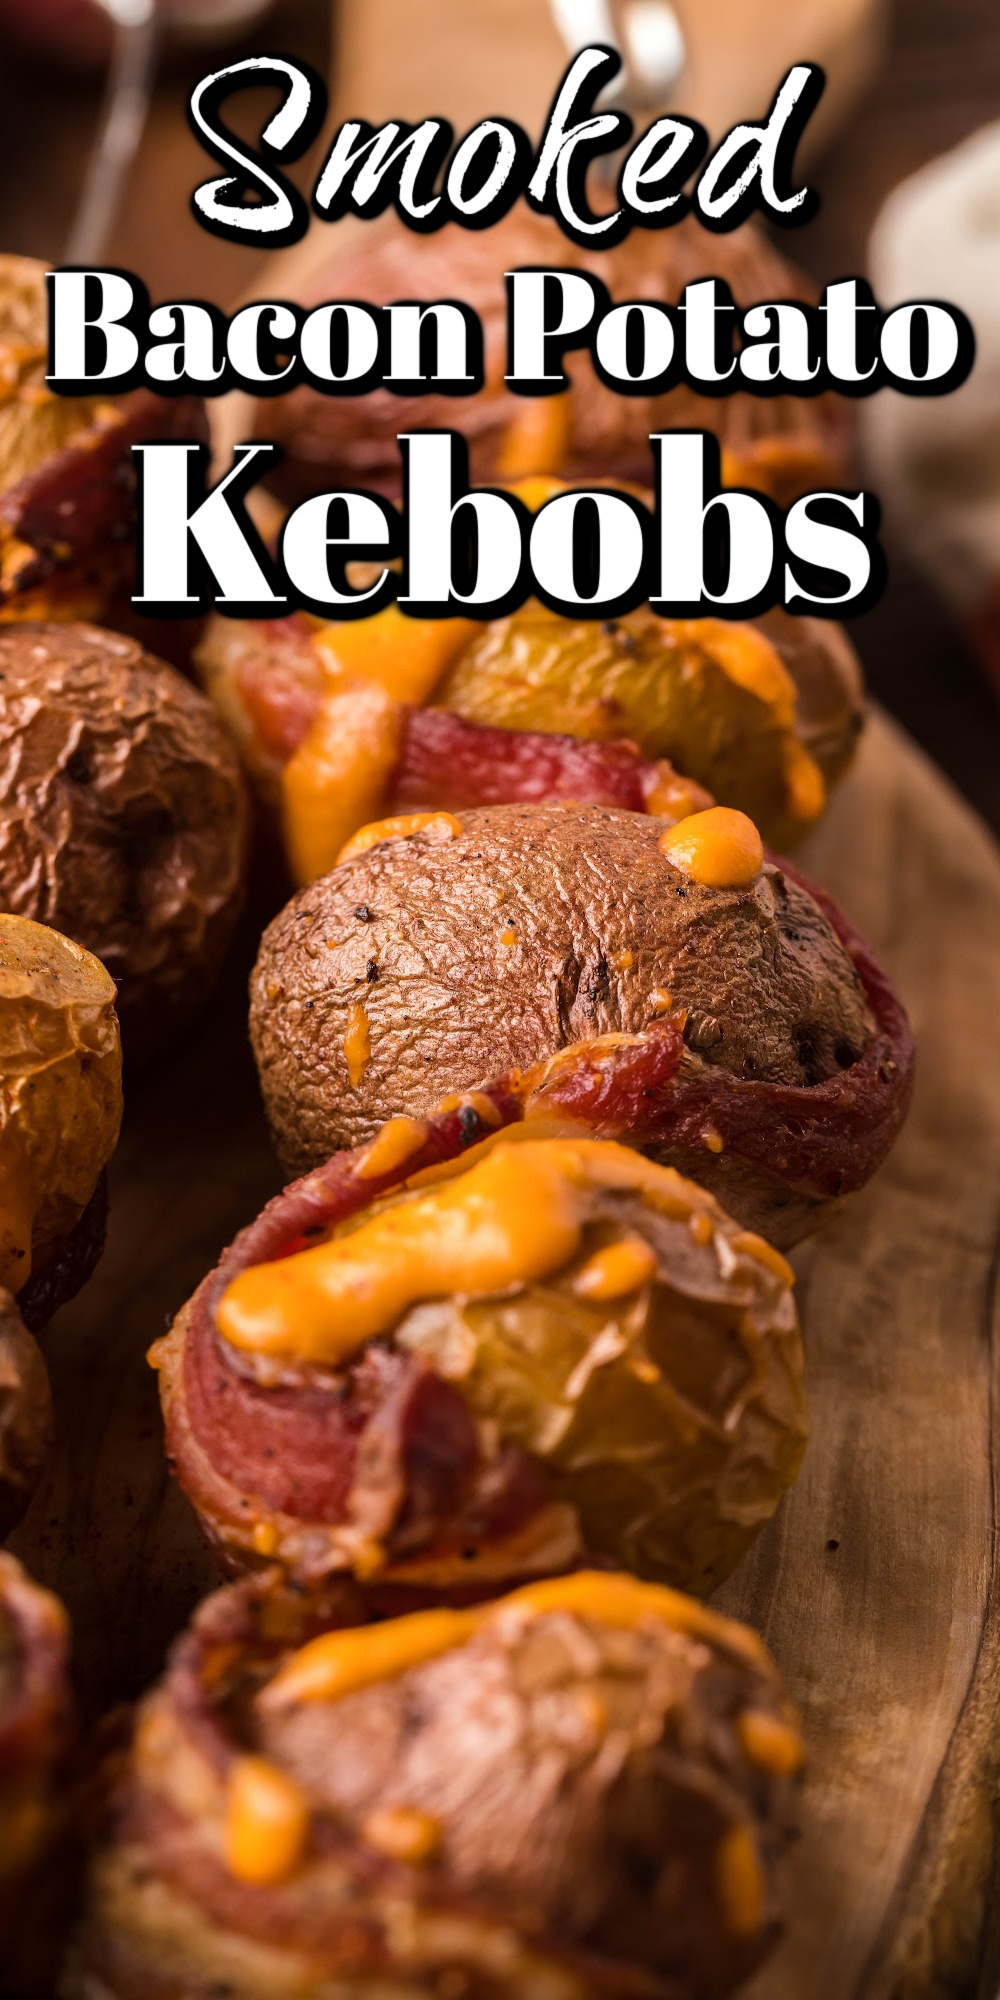 Try these smoked potato kebobs with bacon and cheese sauce for your next gathering; they will be a big hit!